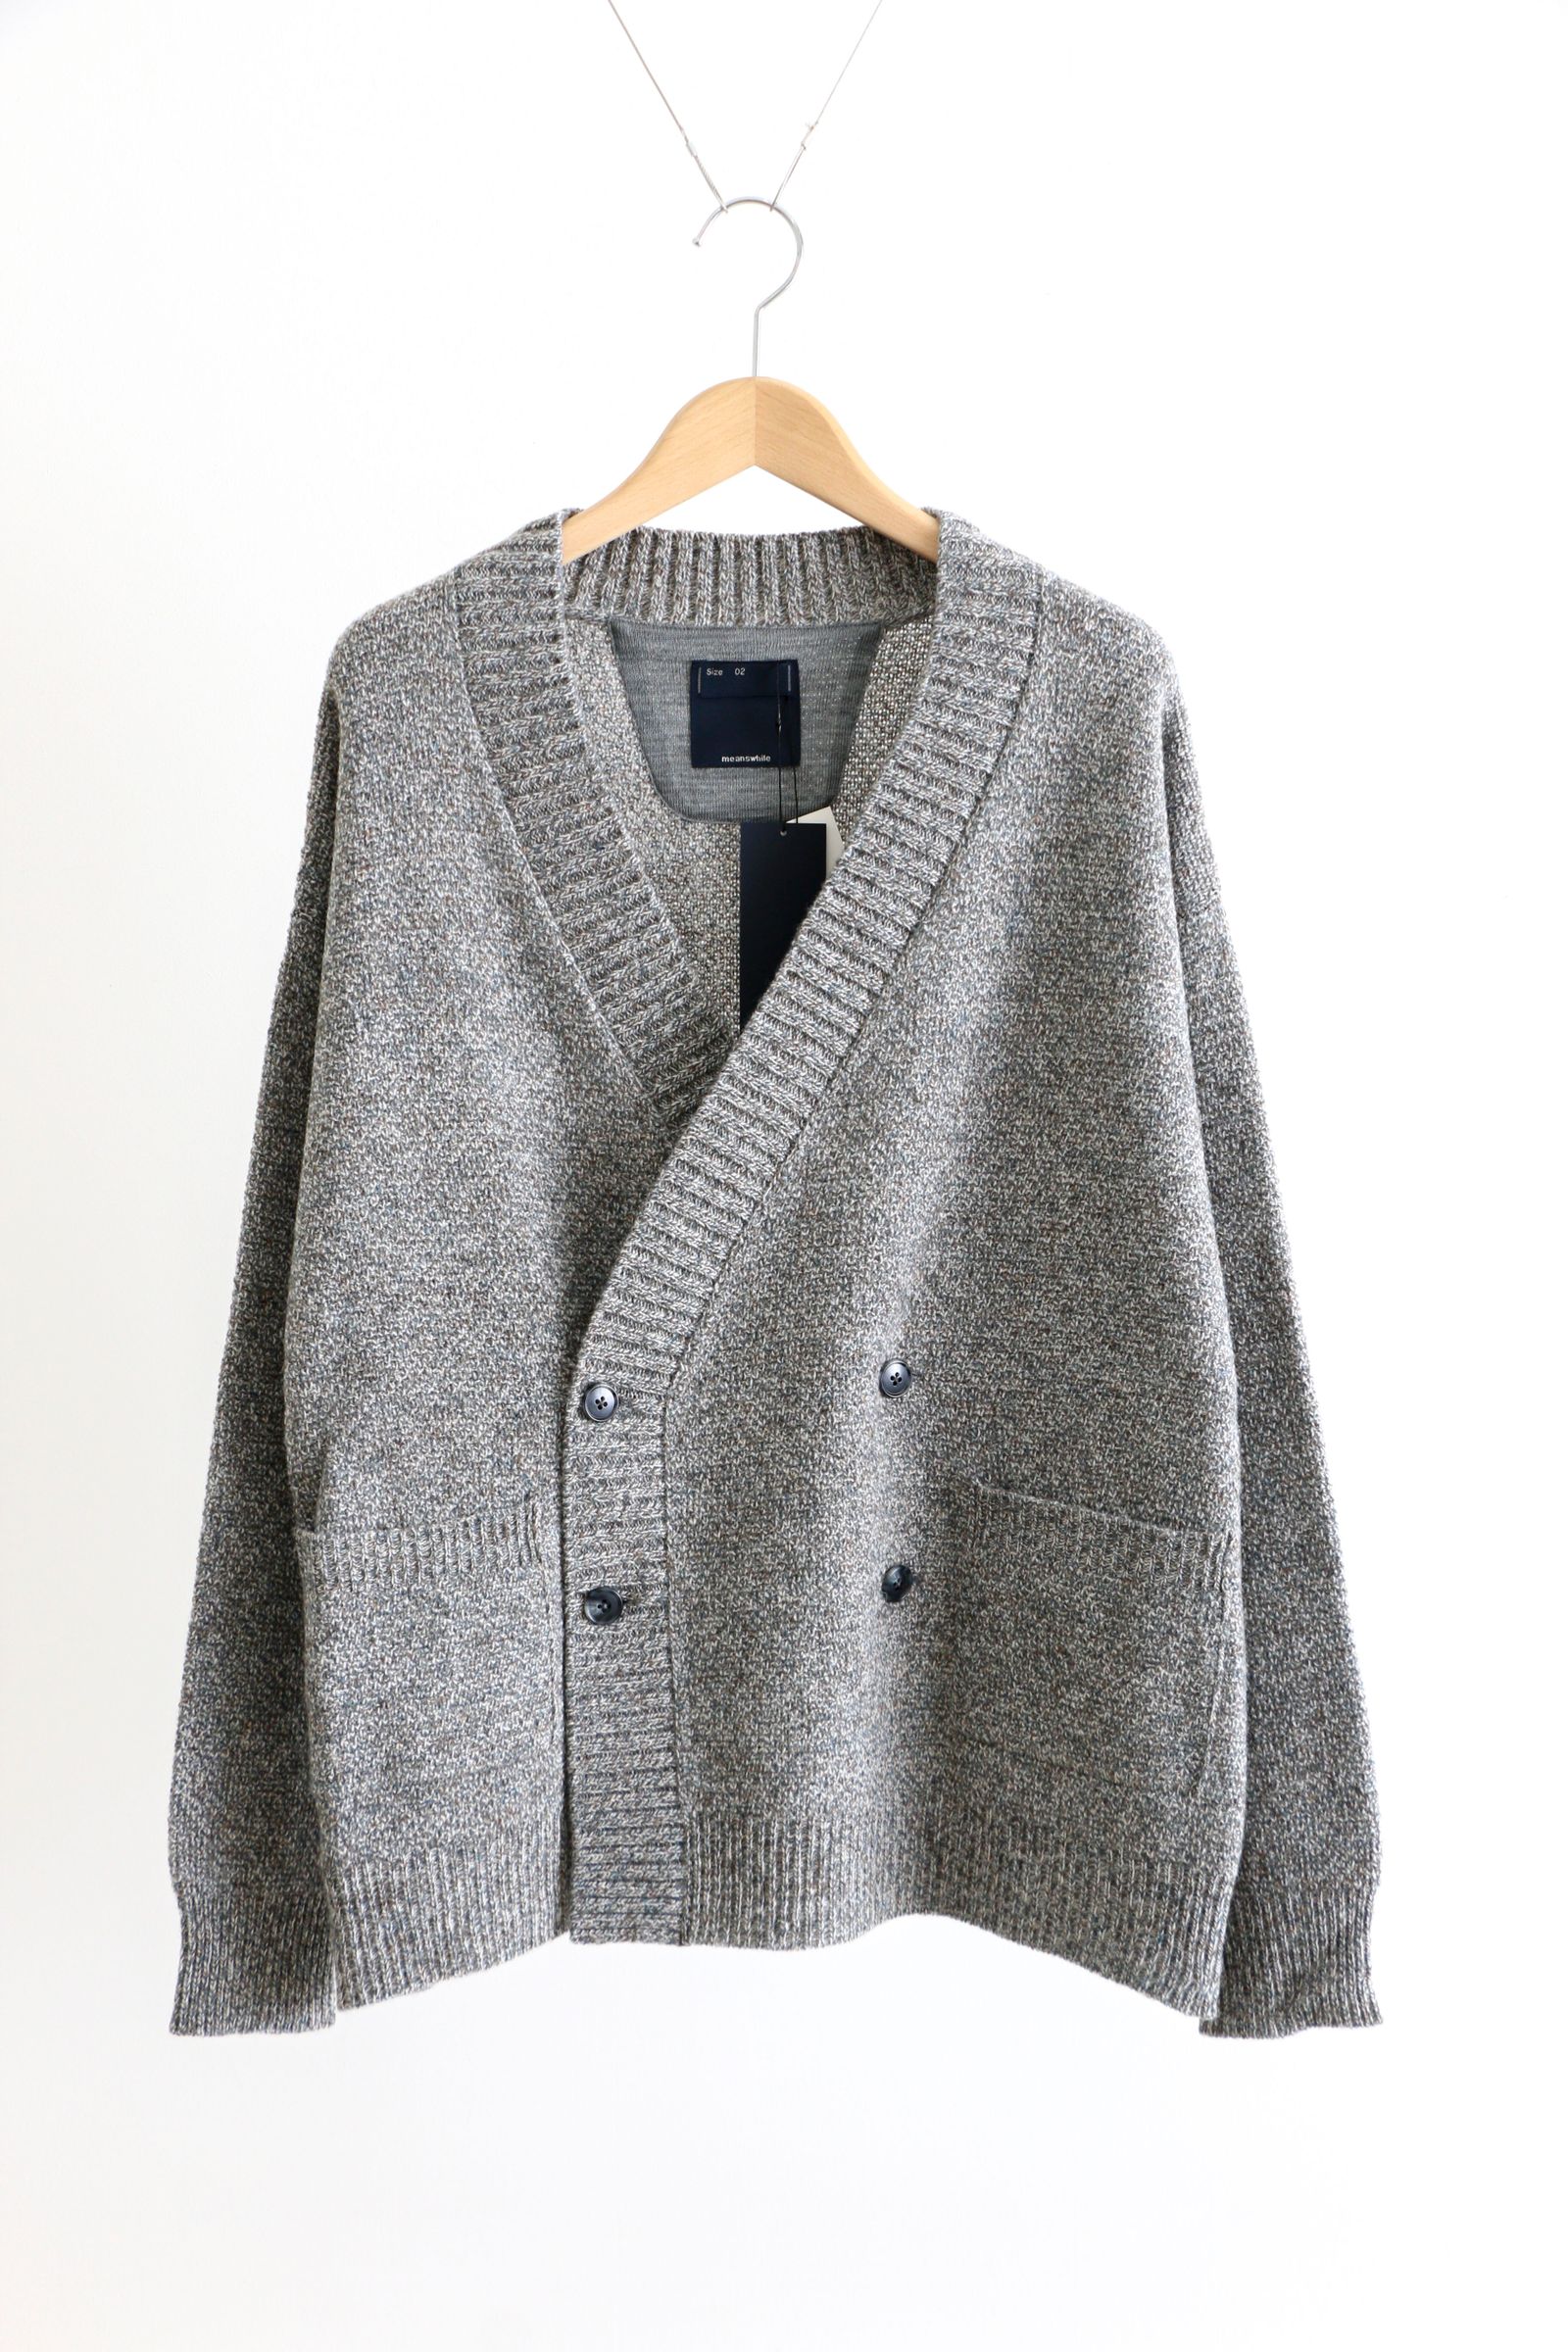 meanswhile - DOUBLE KNIT CARDIGAN Blue Grey | koko